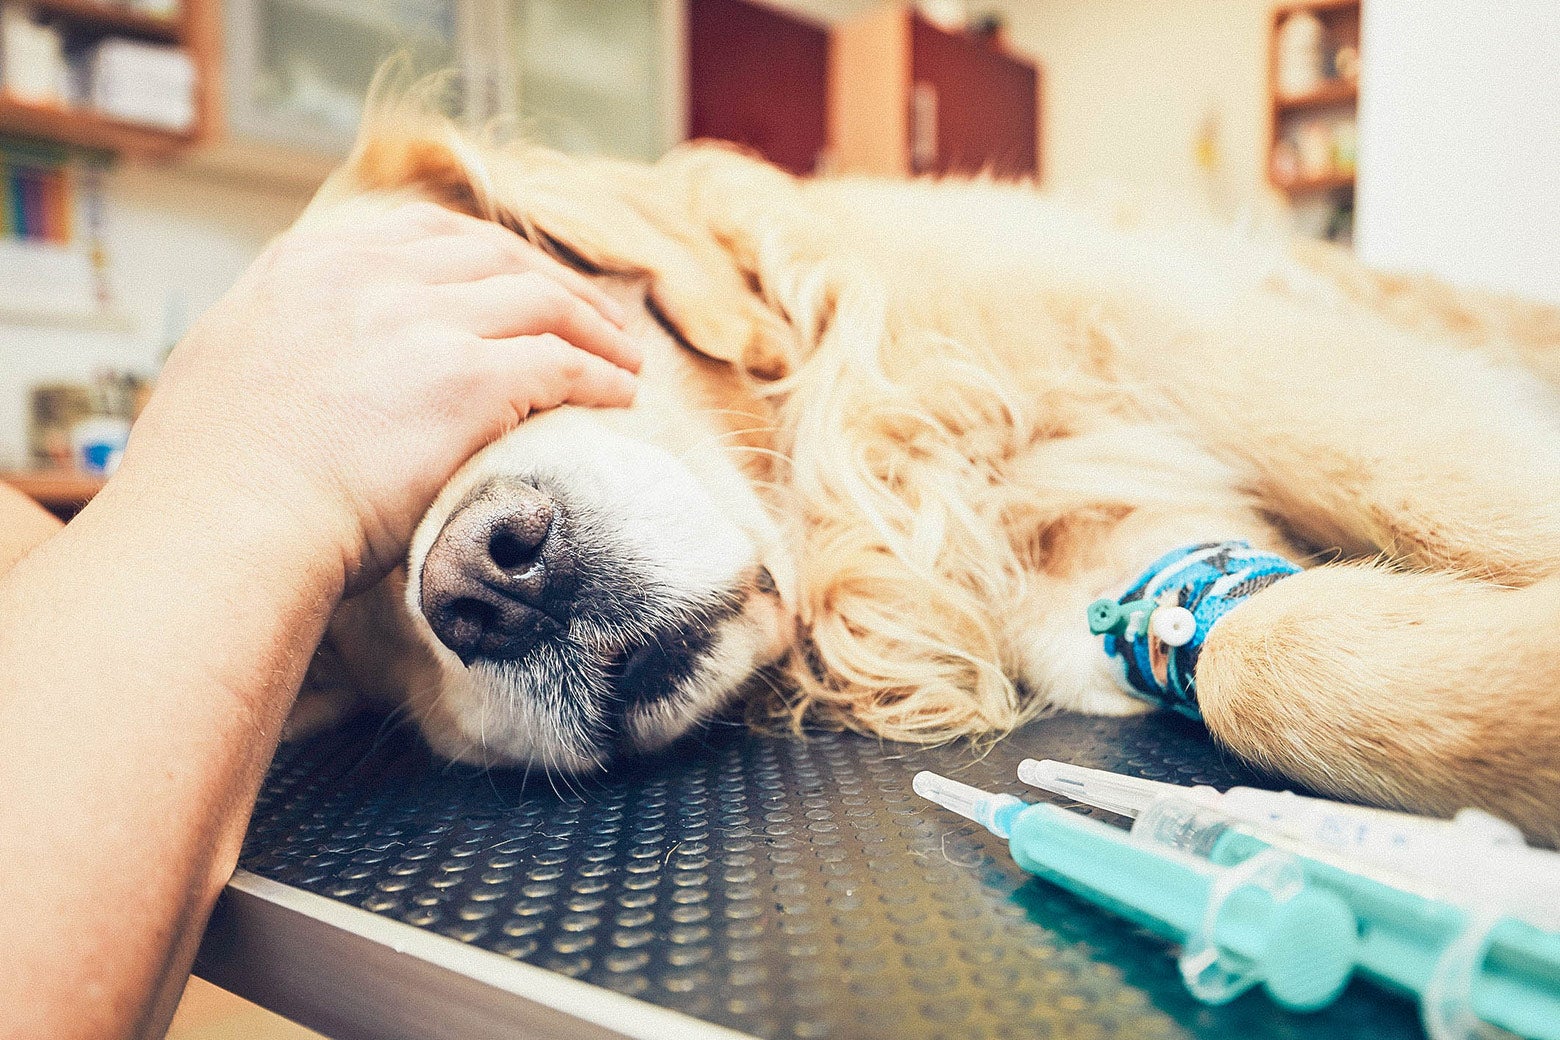 A golden retriever lays on a vet table with a person's hand over its eyes and syringes nearby